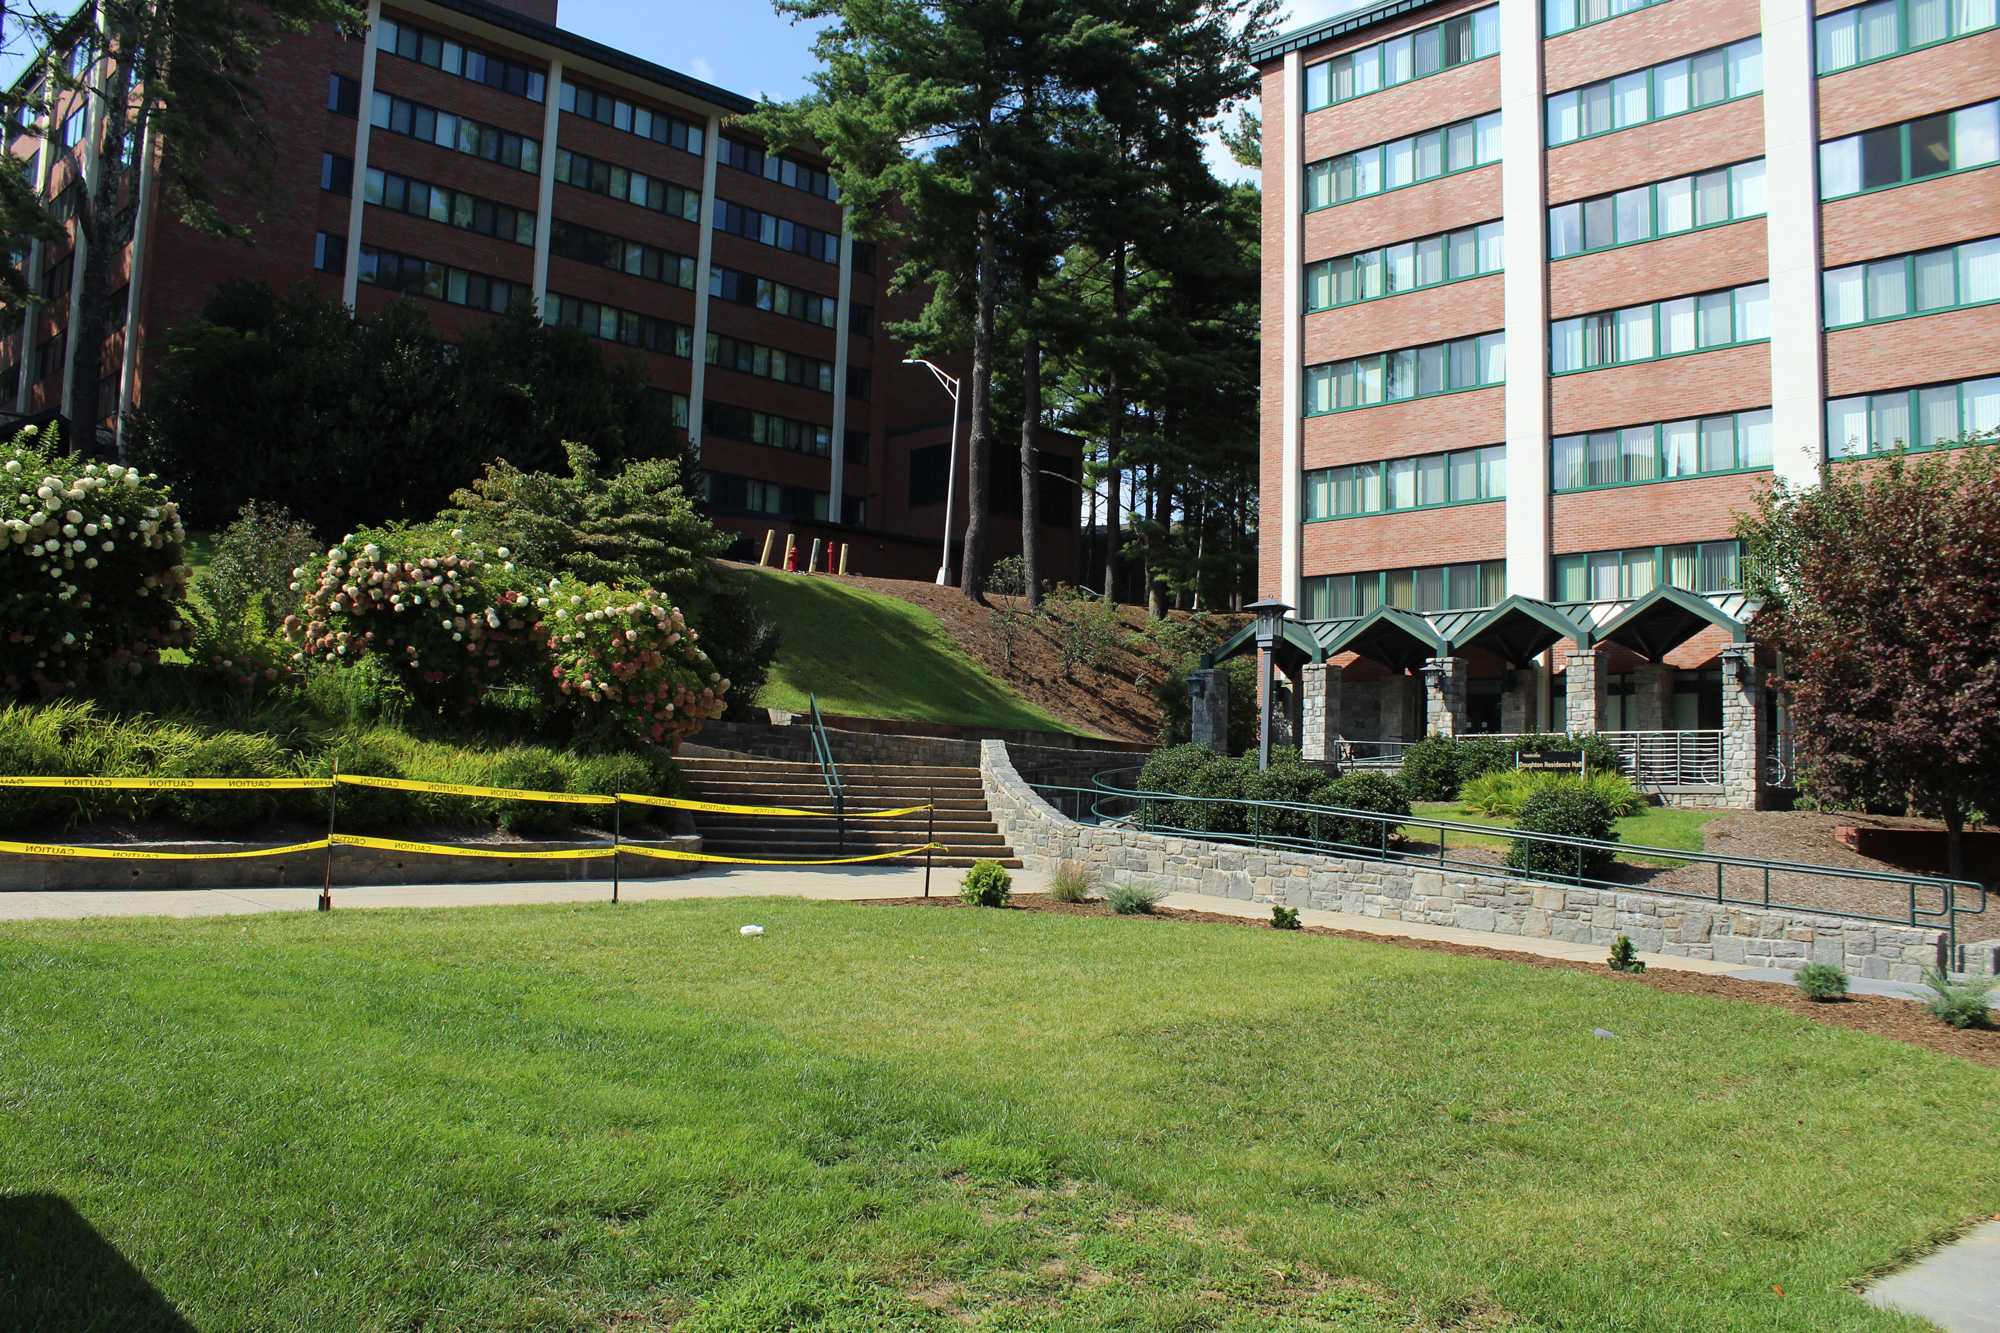 The pit is well-known to student smokers on the east side of campus. The pit is located between Doughton and Lovill residence halls